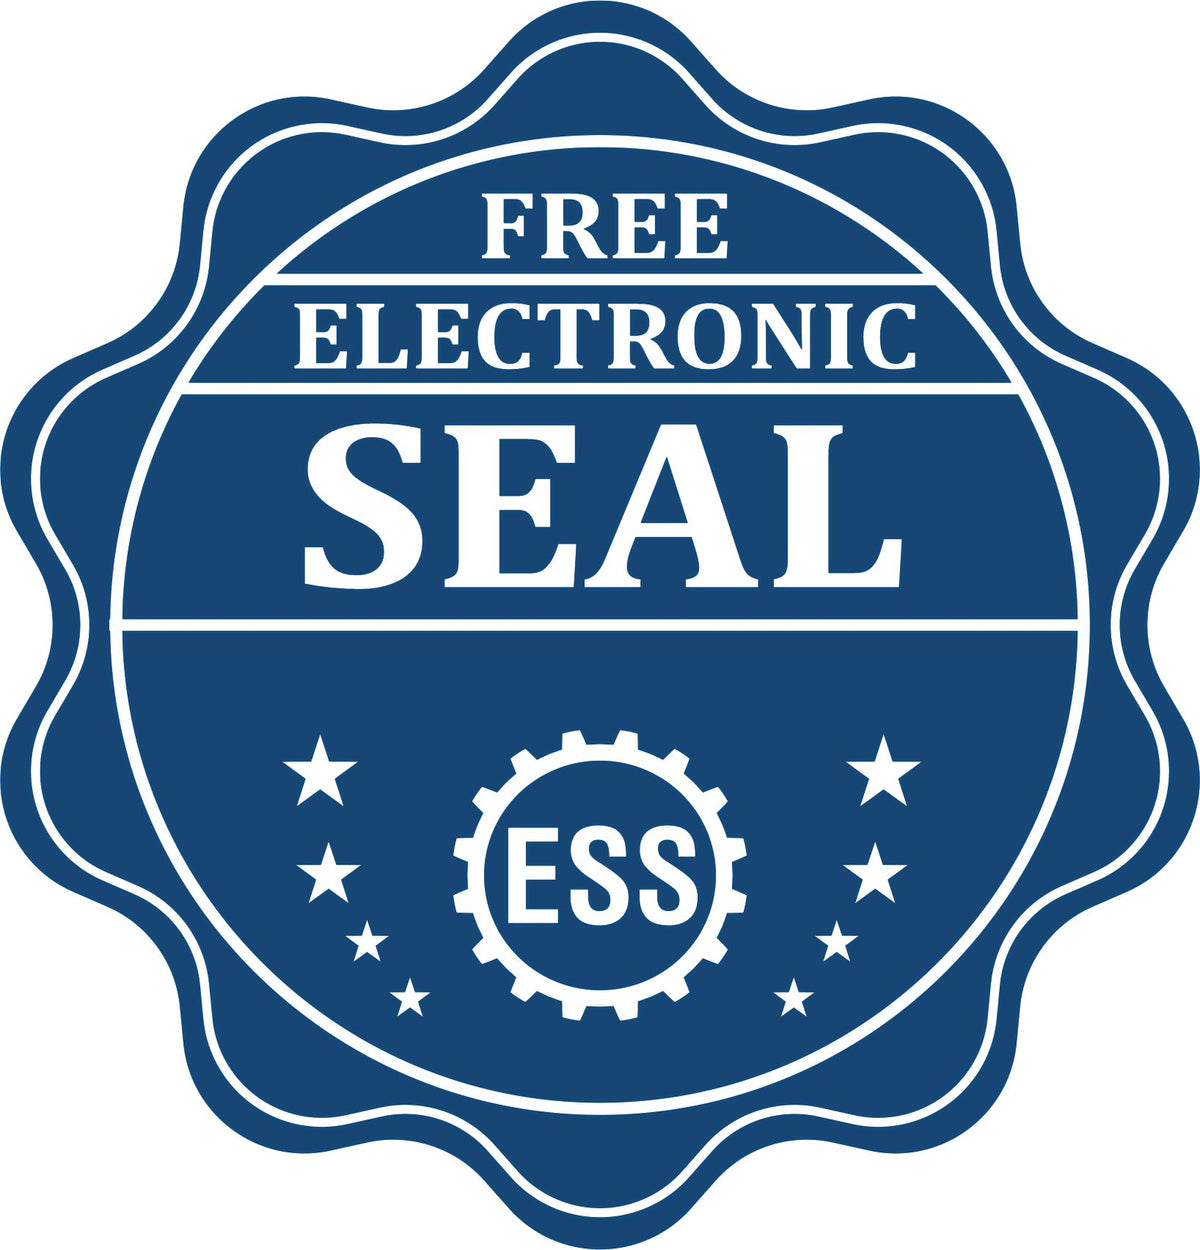 A badge showing a free electronic seal for the Slim Pre-Inked Georgia Professional Geologist Seal Stamp with stars and the ESS gear on the emblem.